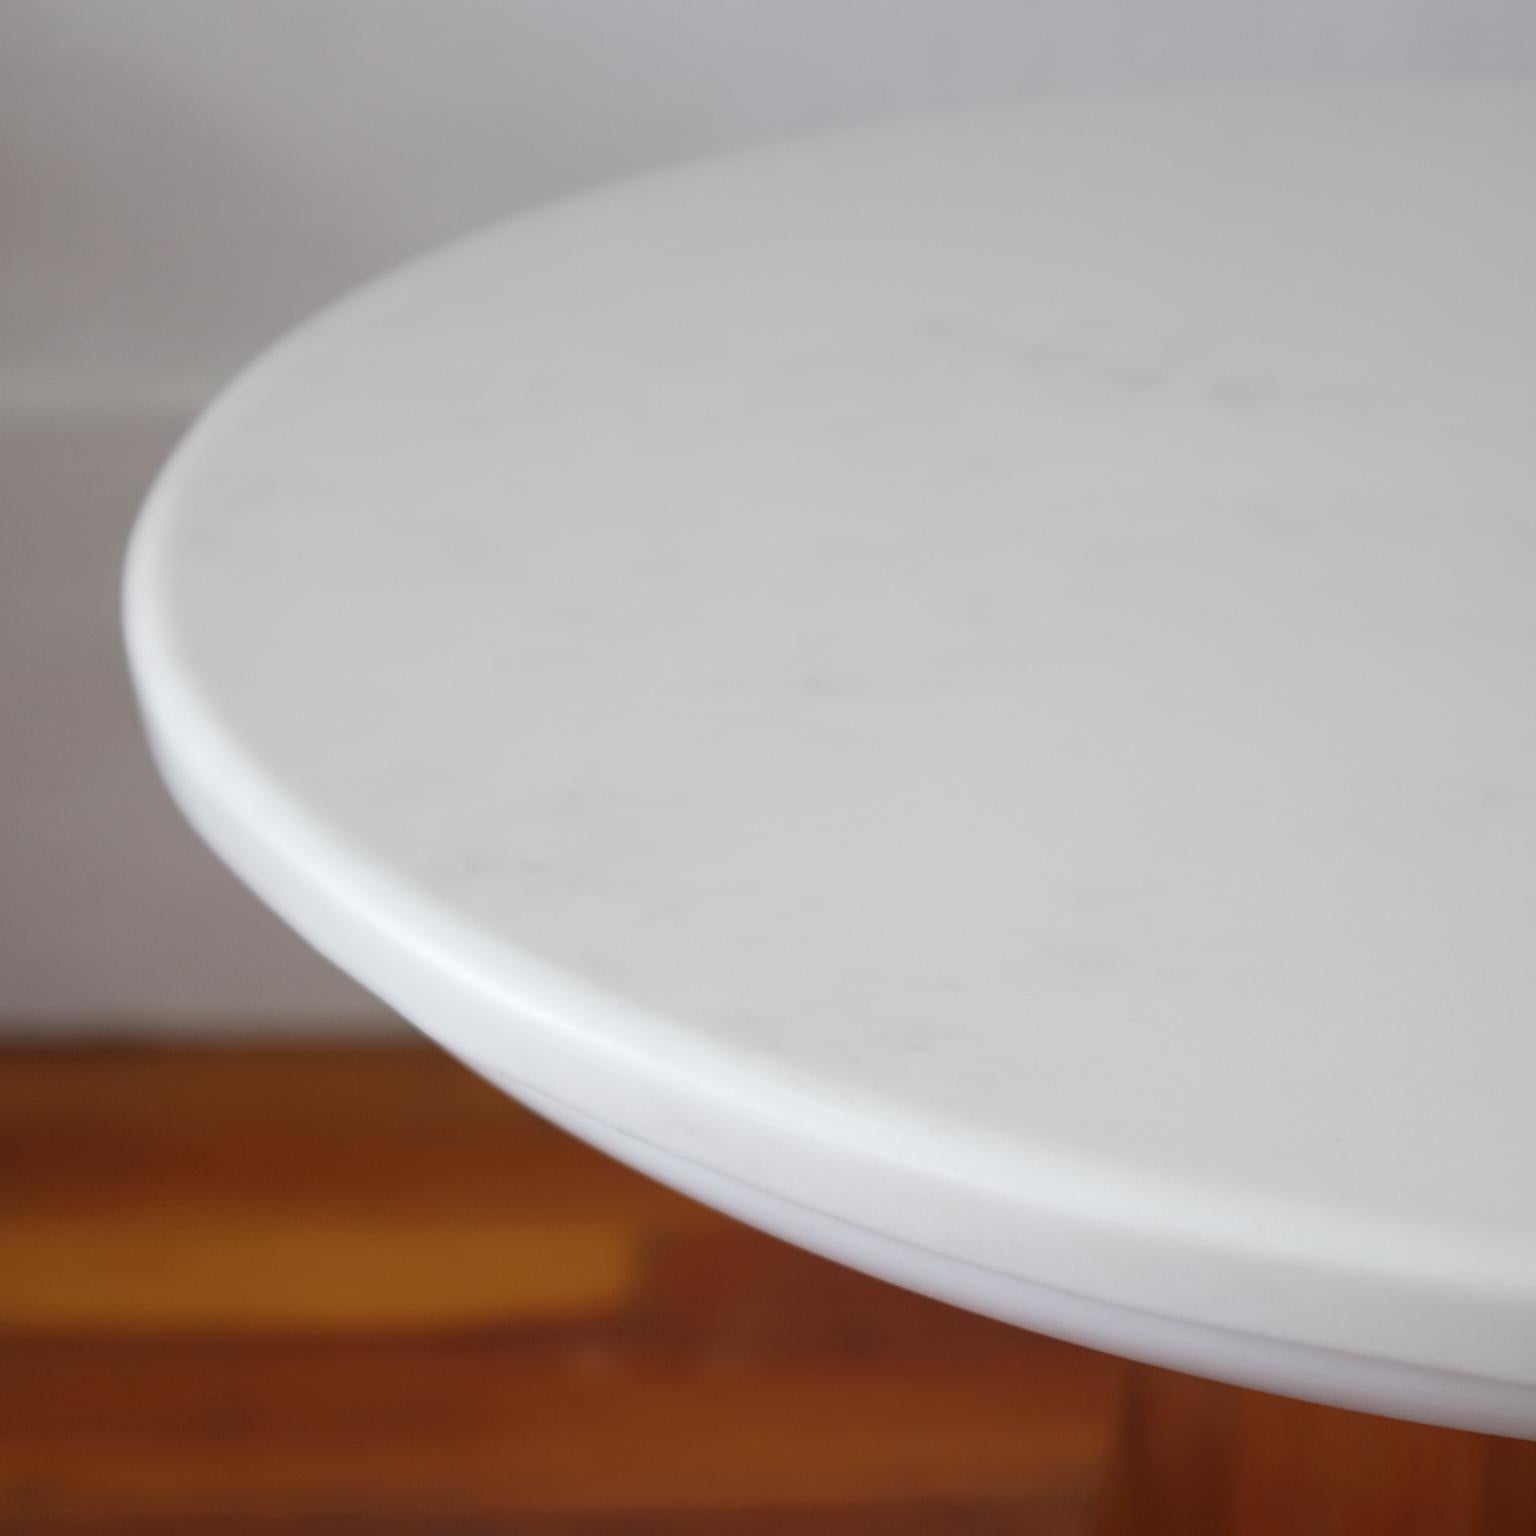 Mid-20th Century Frank Rohloff Marble Top Table with Pedestal Base, California Design 1960s